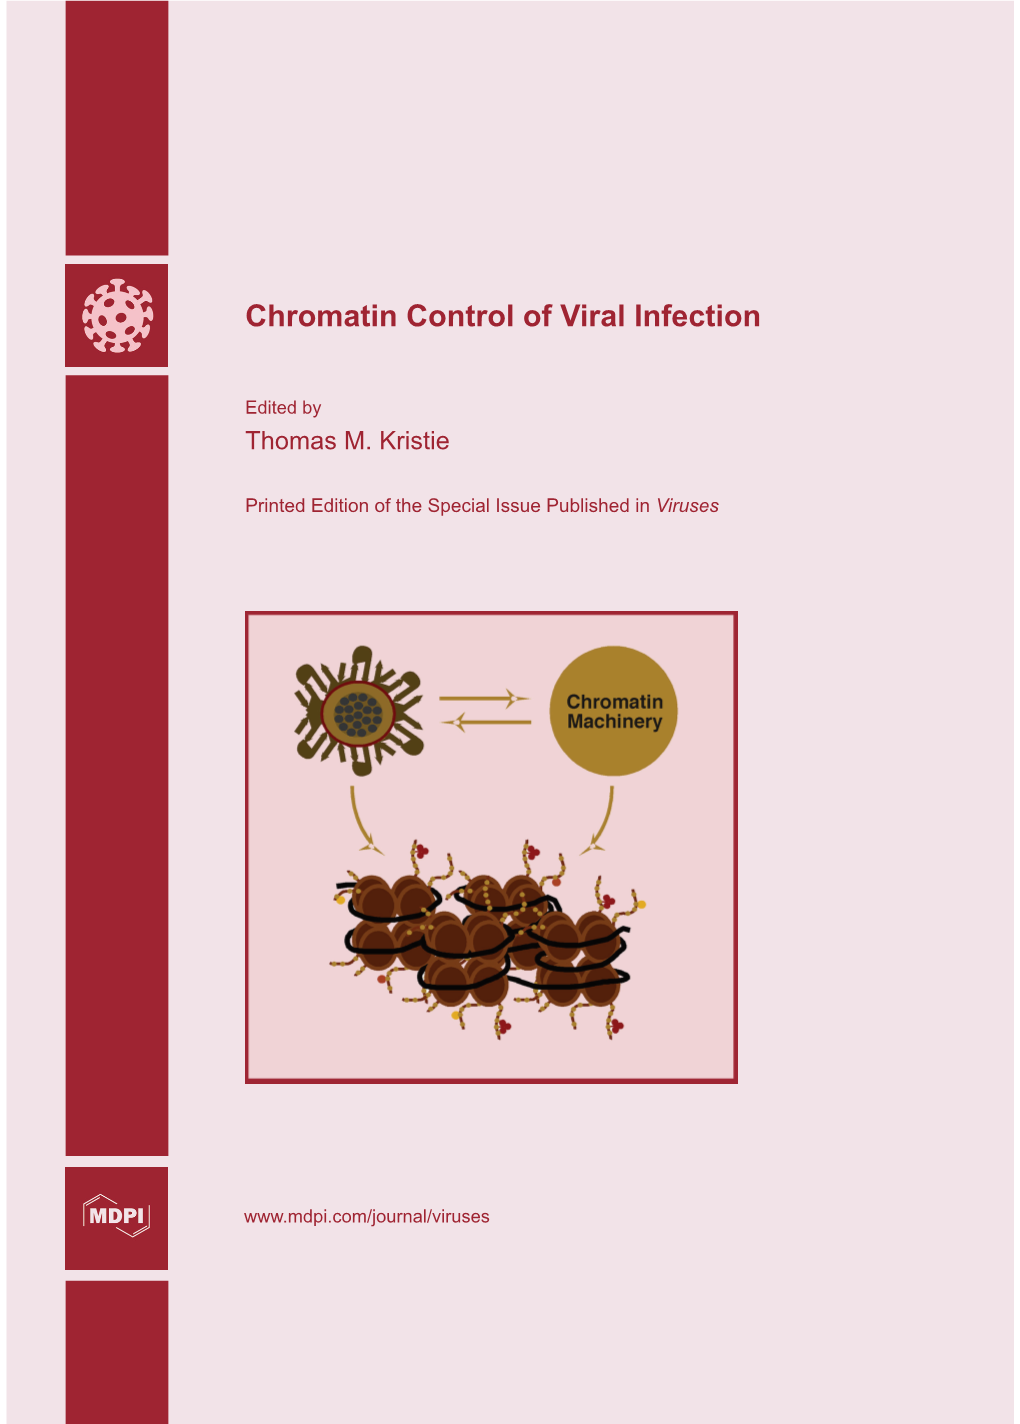 Chromatin Control of Viral Infection